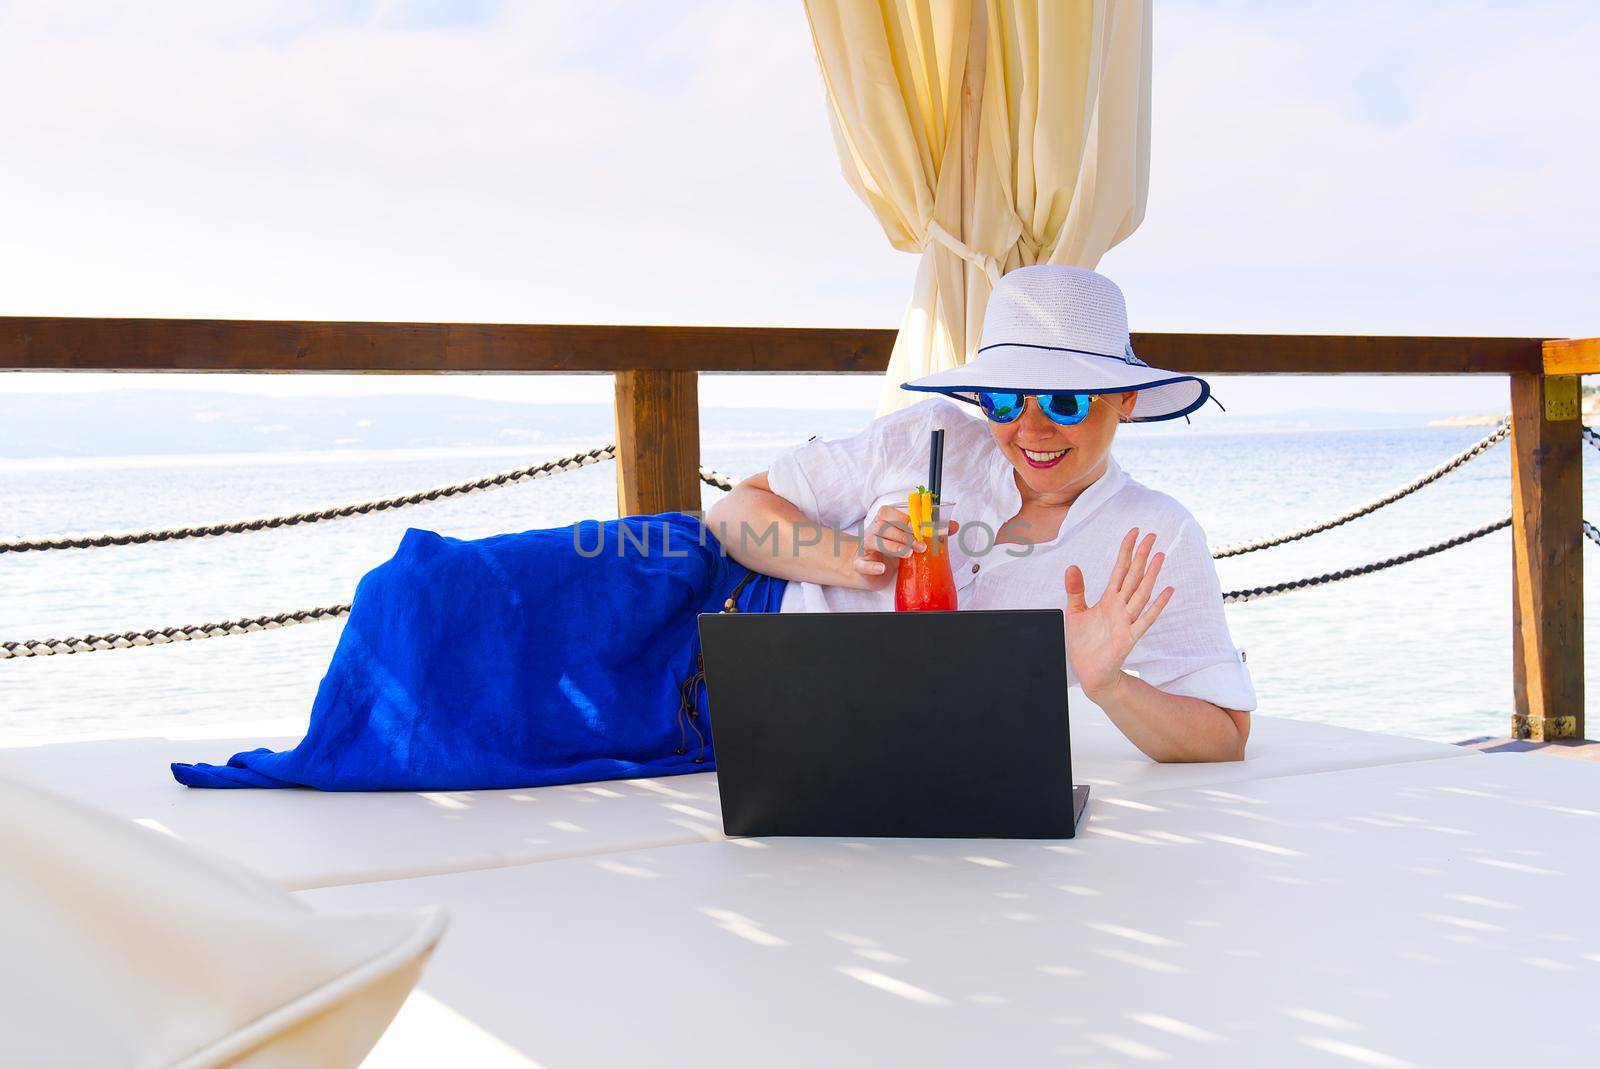 businesswoman handle buisness on her trip by laptop at summer vacation. by PhotoTime